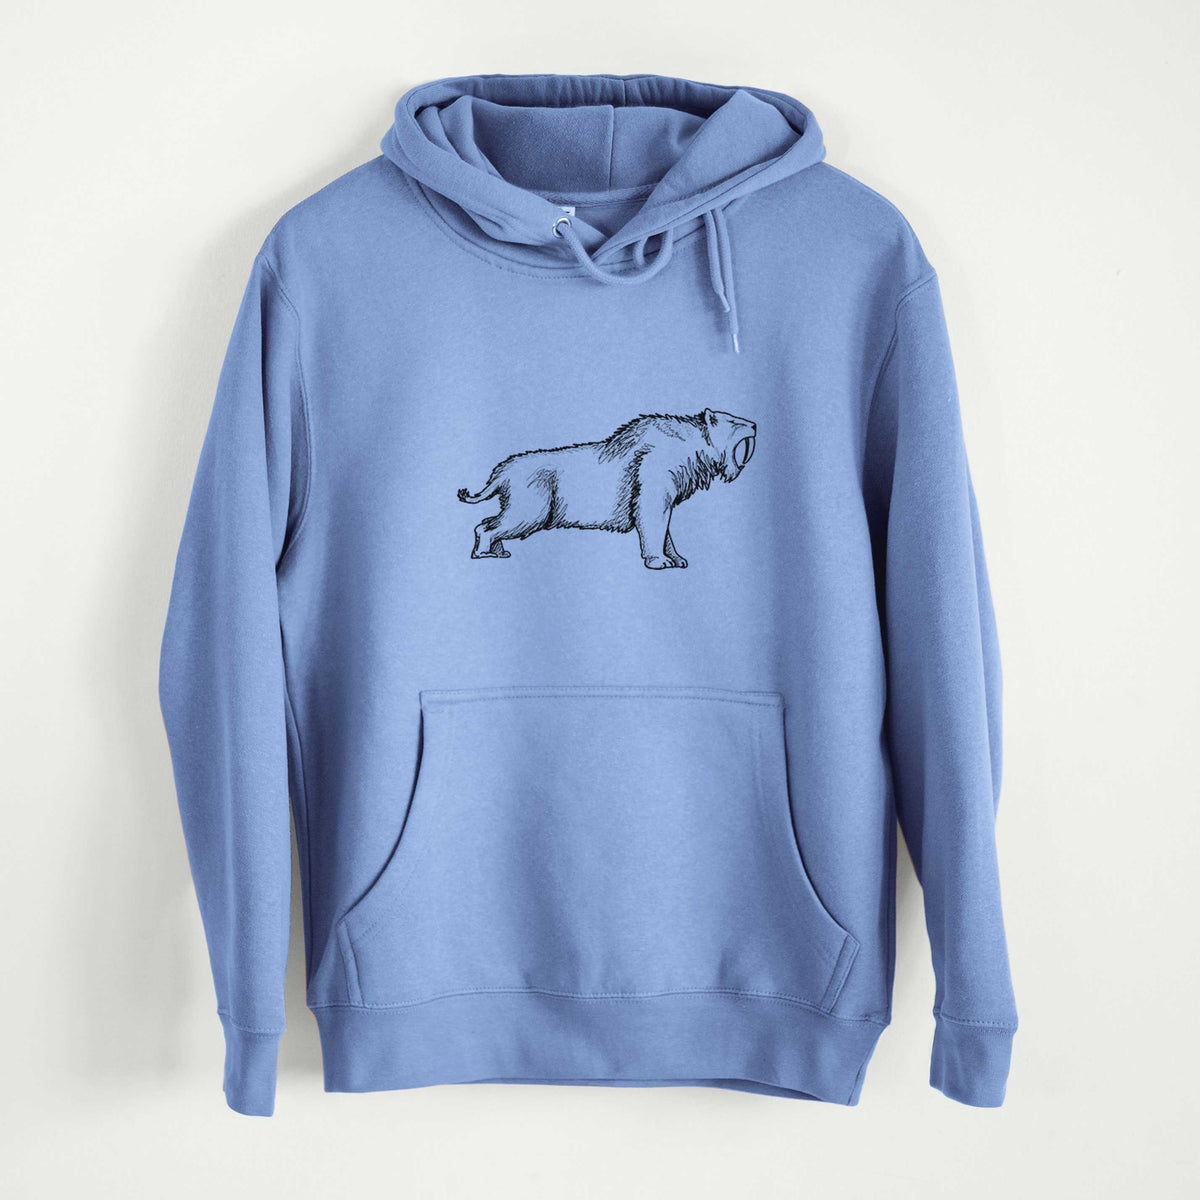 Saber-toothed Tiger - Smilodon  - Mid-Weight Unisex Premium Blend Hoodie